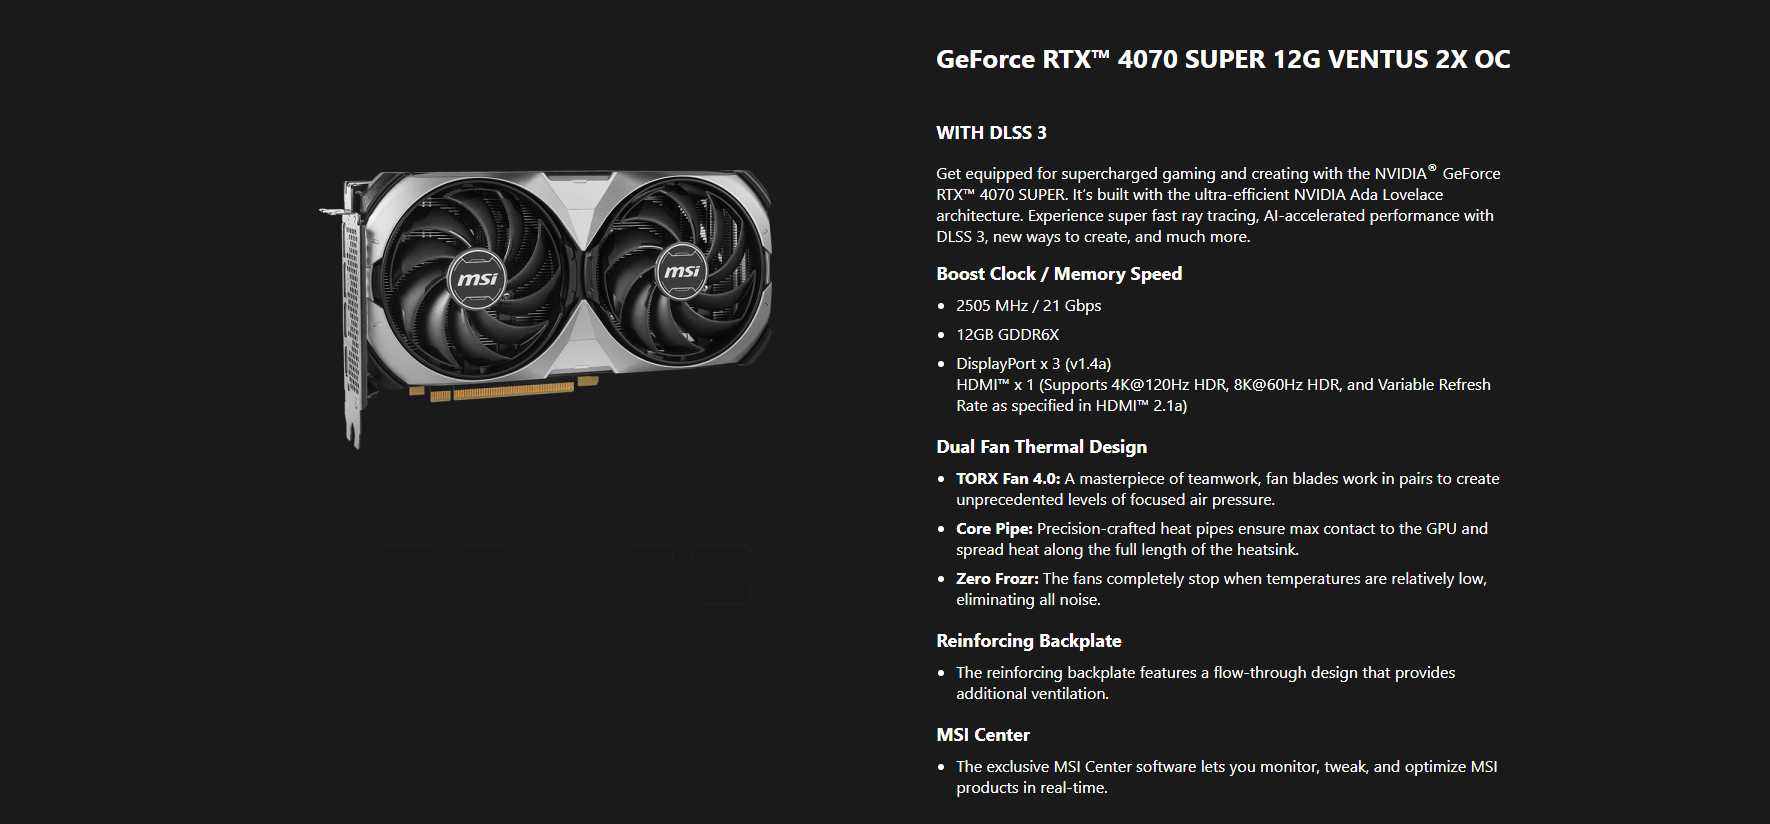 A large marketing image providing additional information about the product MSI GeForce RTX 4070 SUPER Ventus 2X OC 12GB GDDR6X - Black - Additional alt info not provided